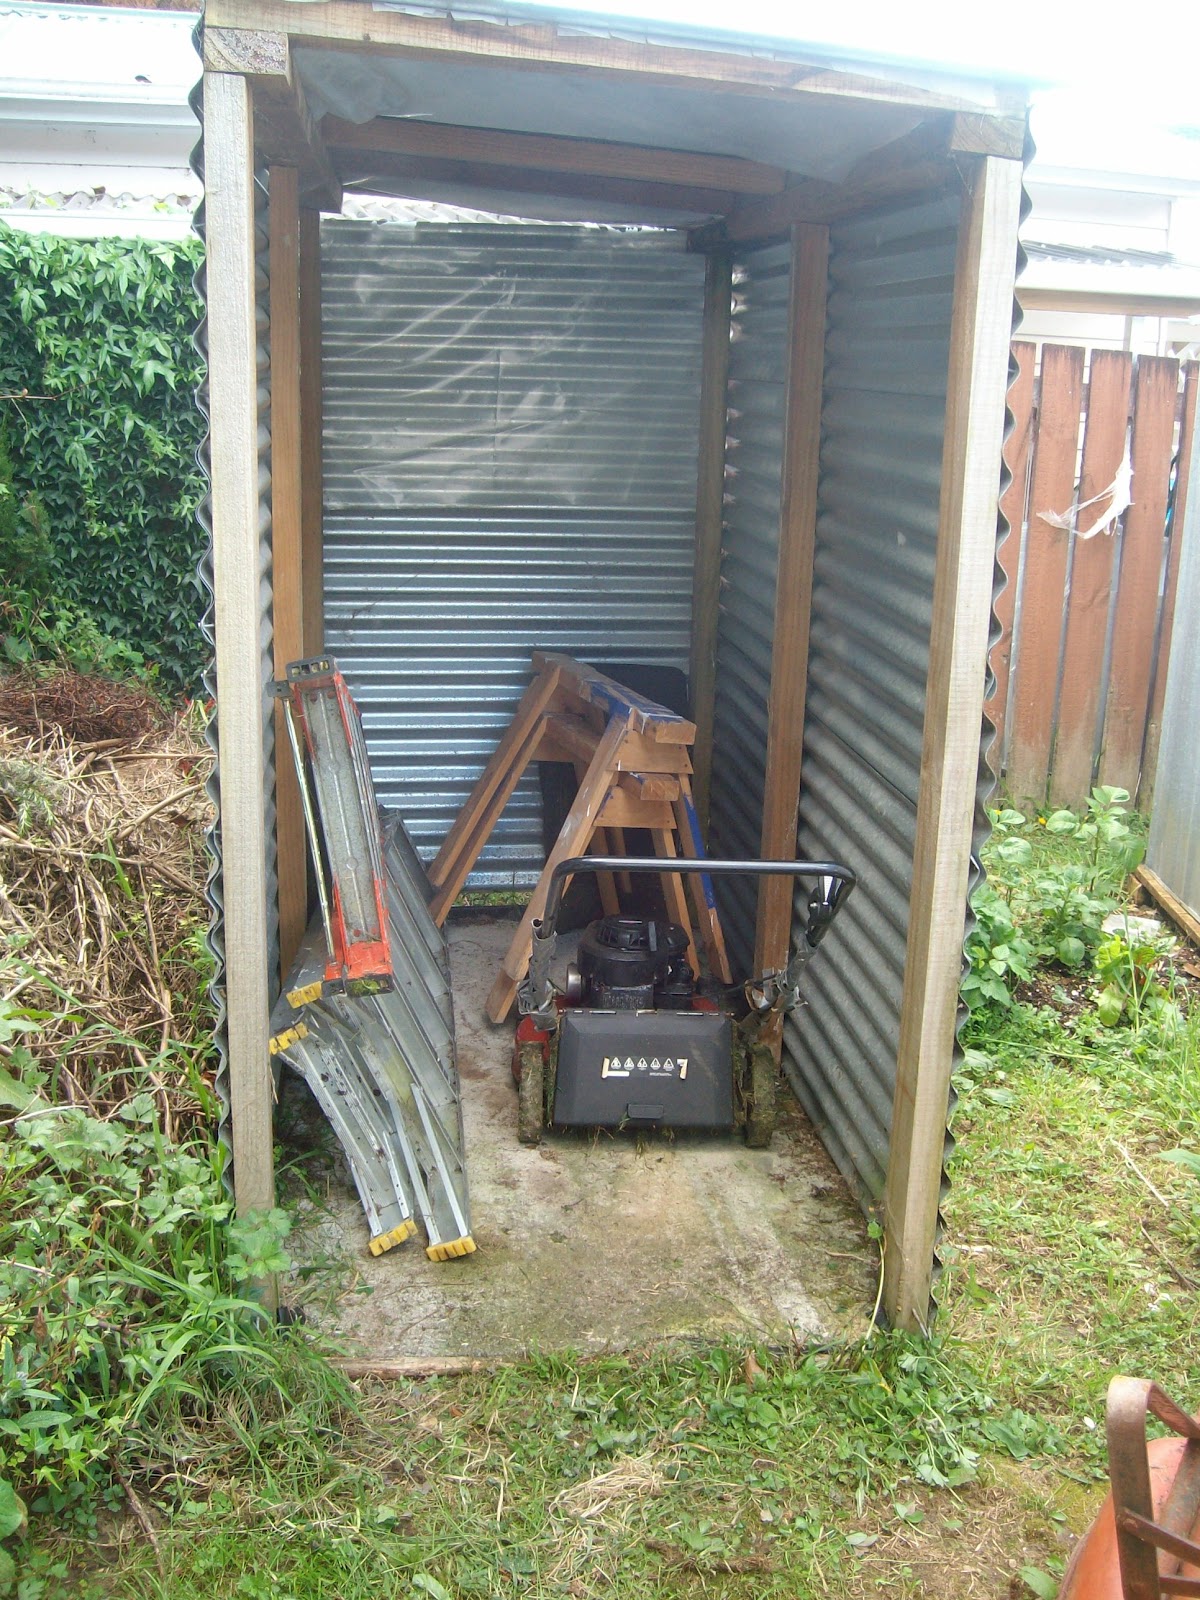 Tifany Blog: How to build a lawn tractor shed